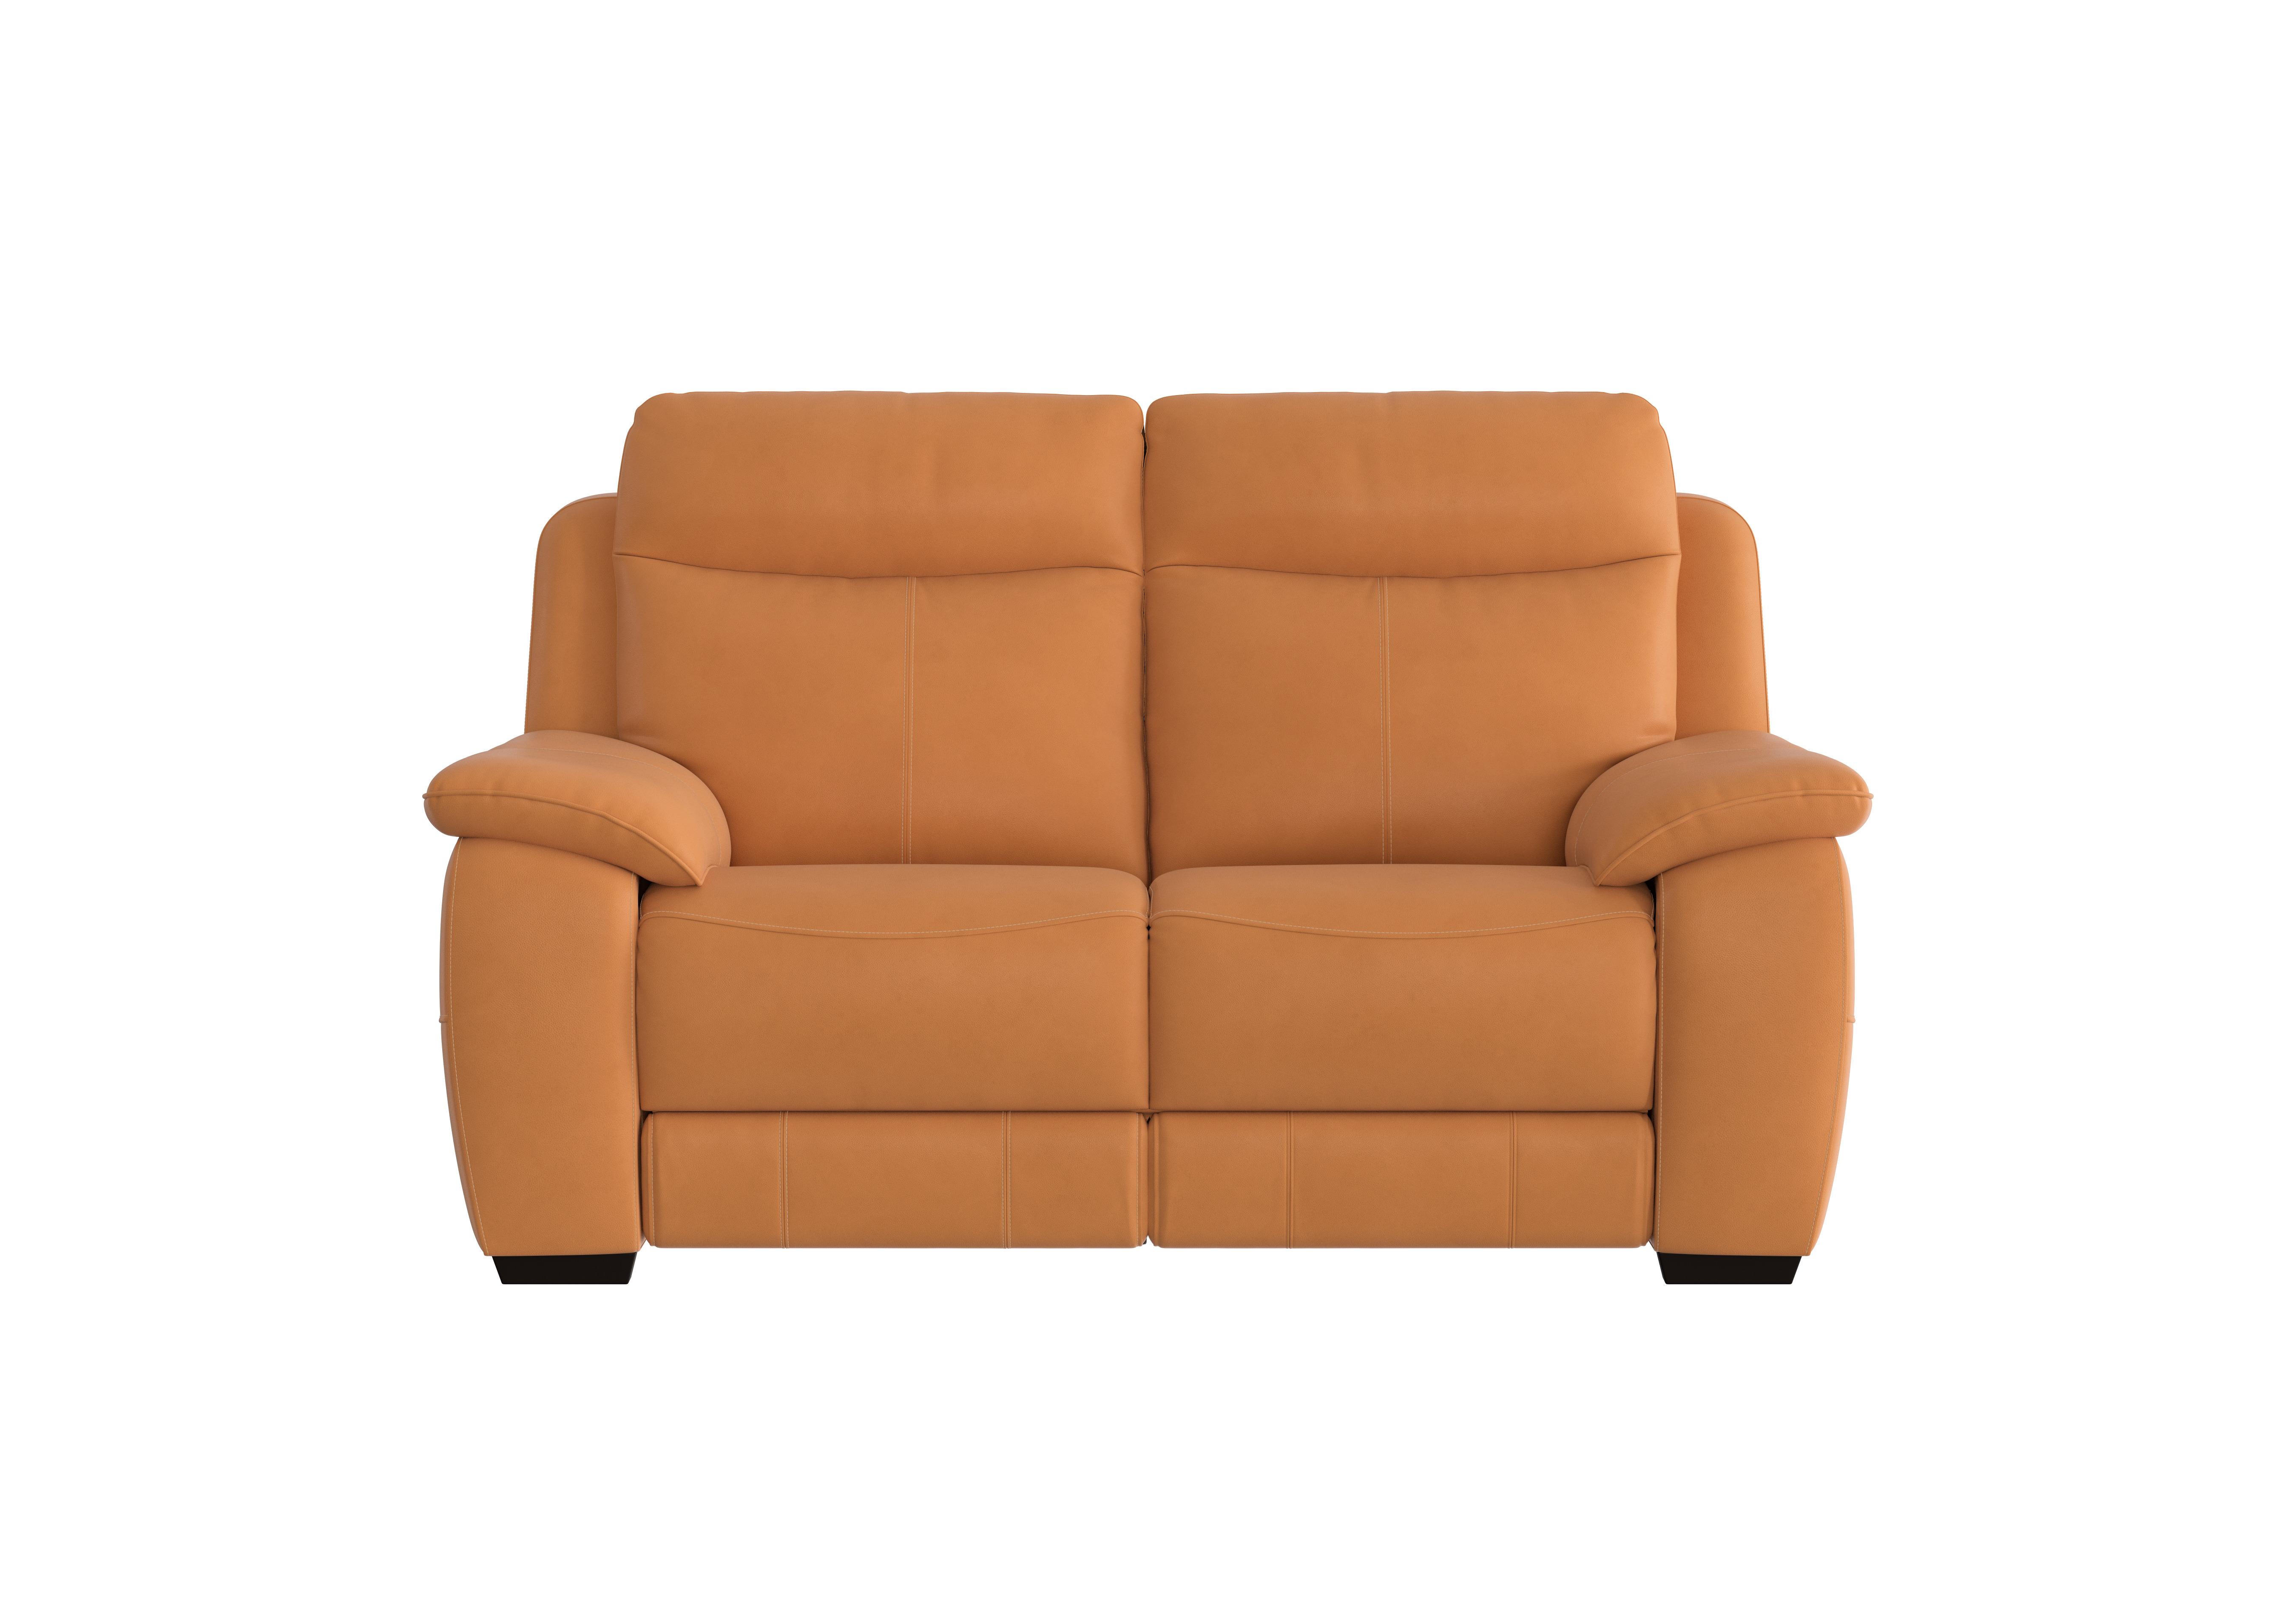 Starlight Express 2 Seater Leather Sofa in Bv-335e Honey Yellow on Furniture Village